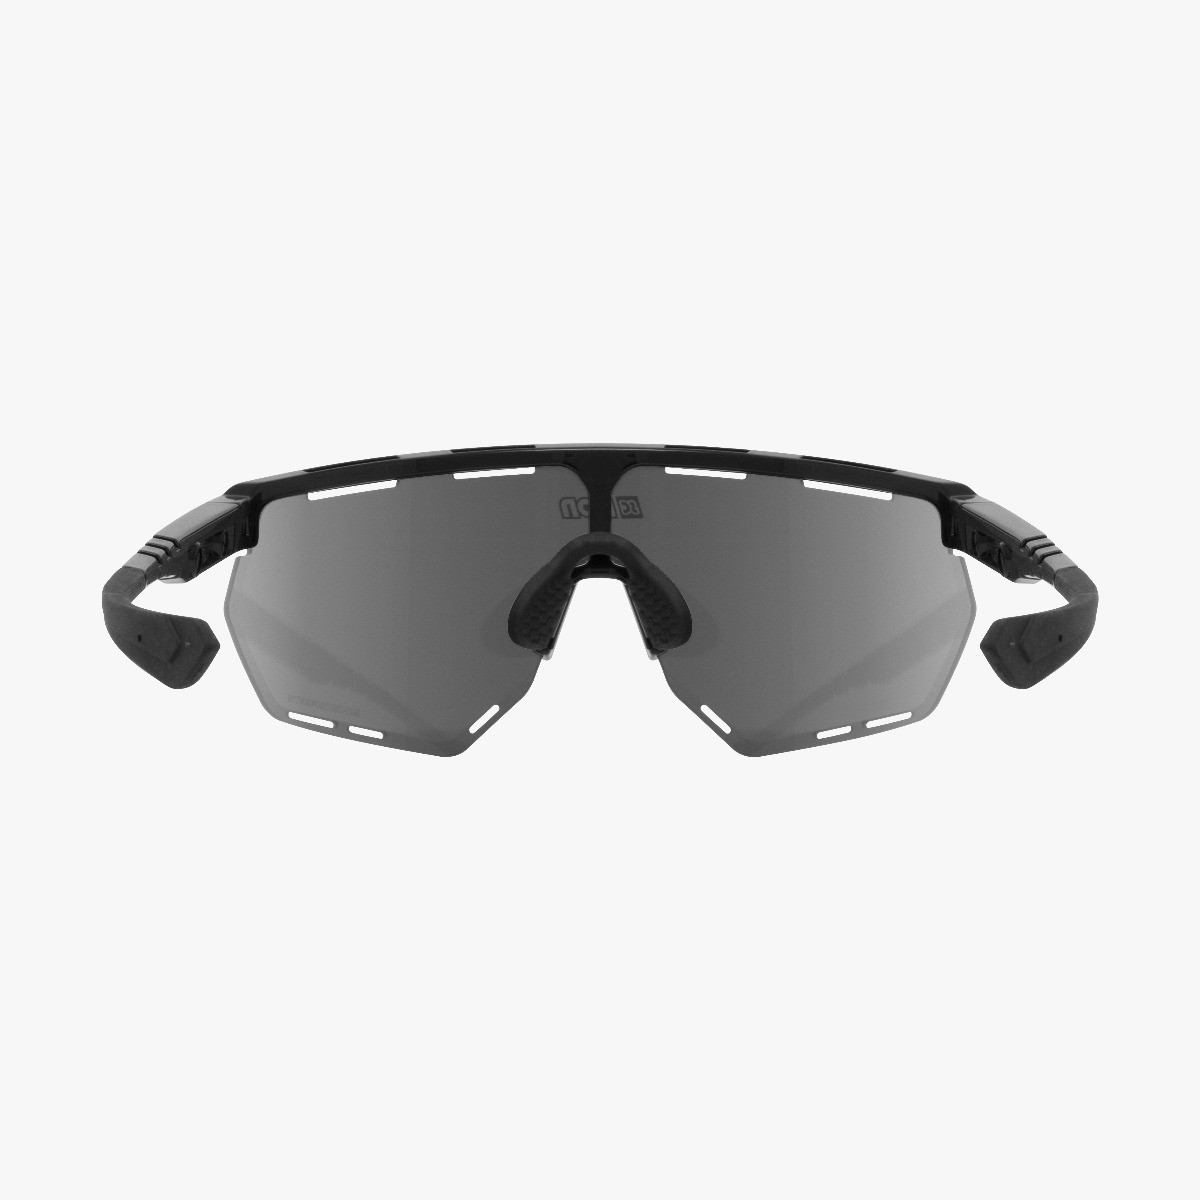 Scicon Sports | Aerowing Sport Performance Sunglasses -Black Gloss / Multimirror Silver - EY26080201